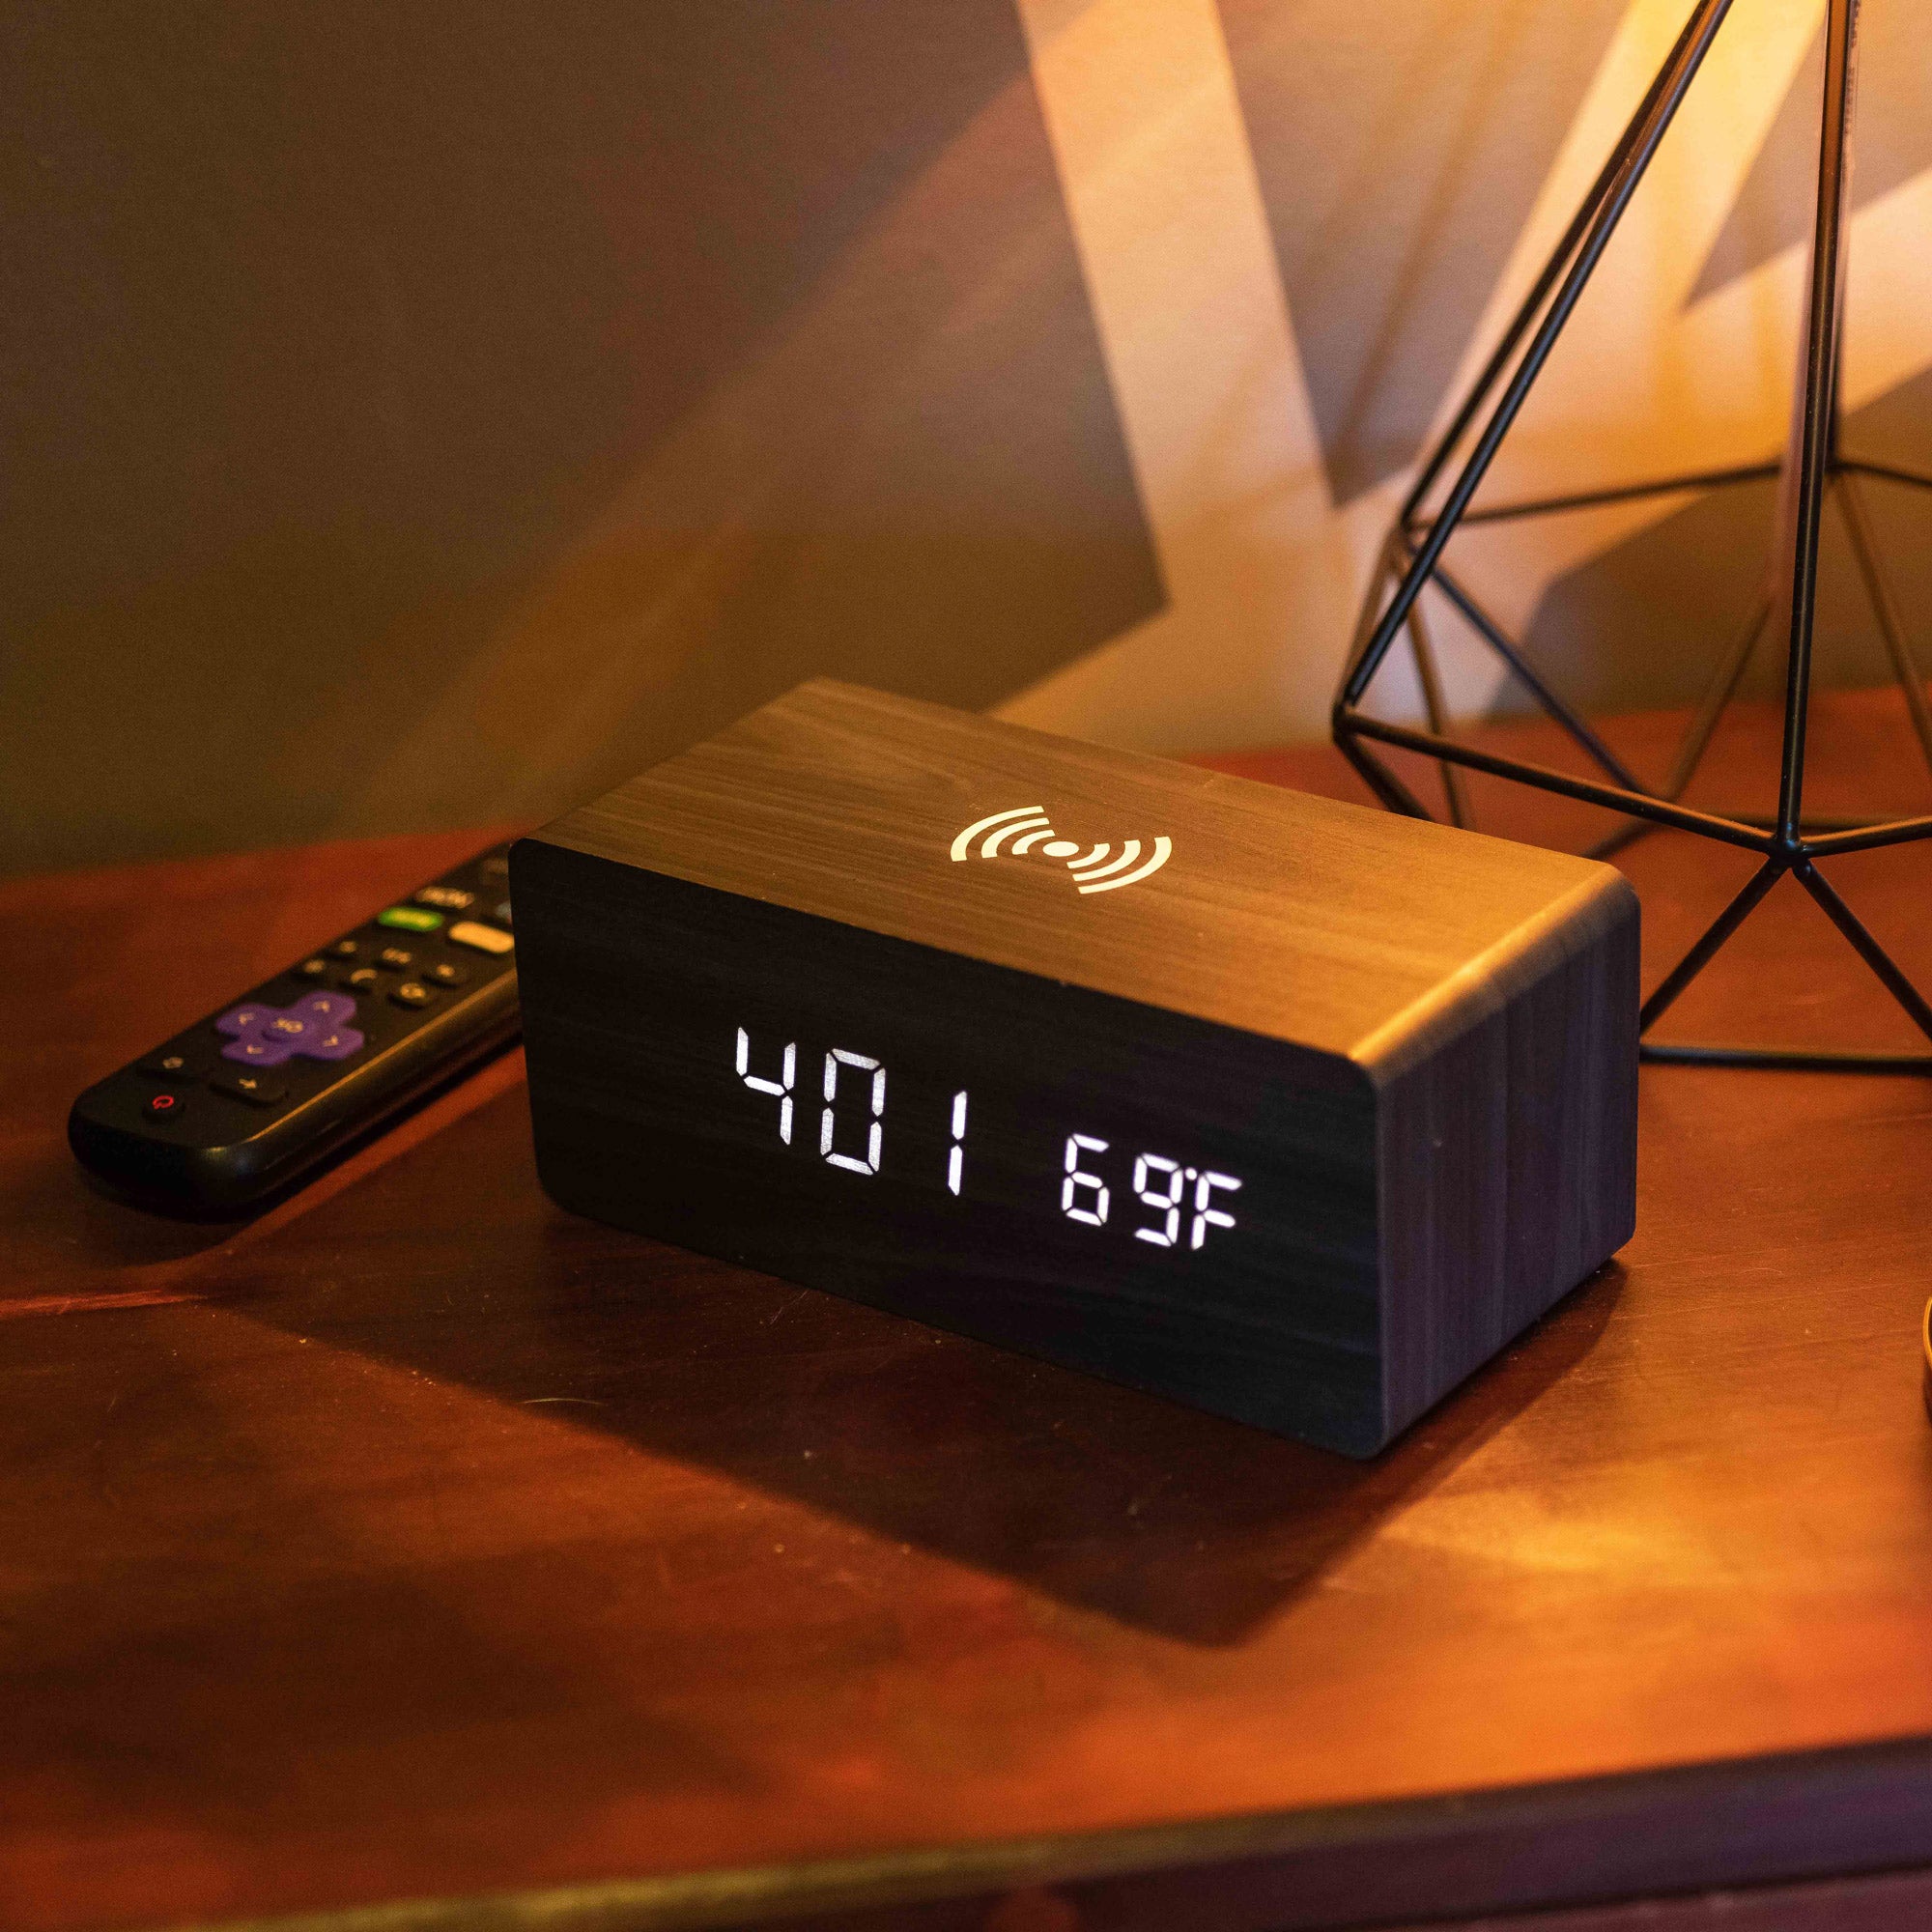 Alarm Clock with Wireless Charging Station